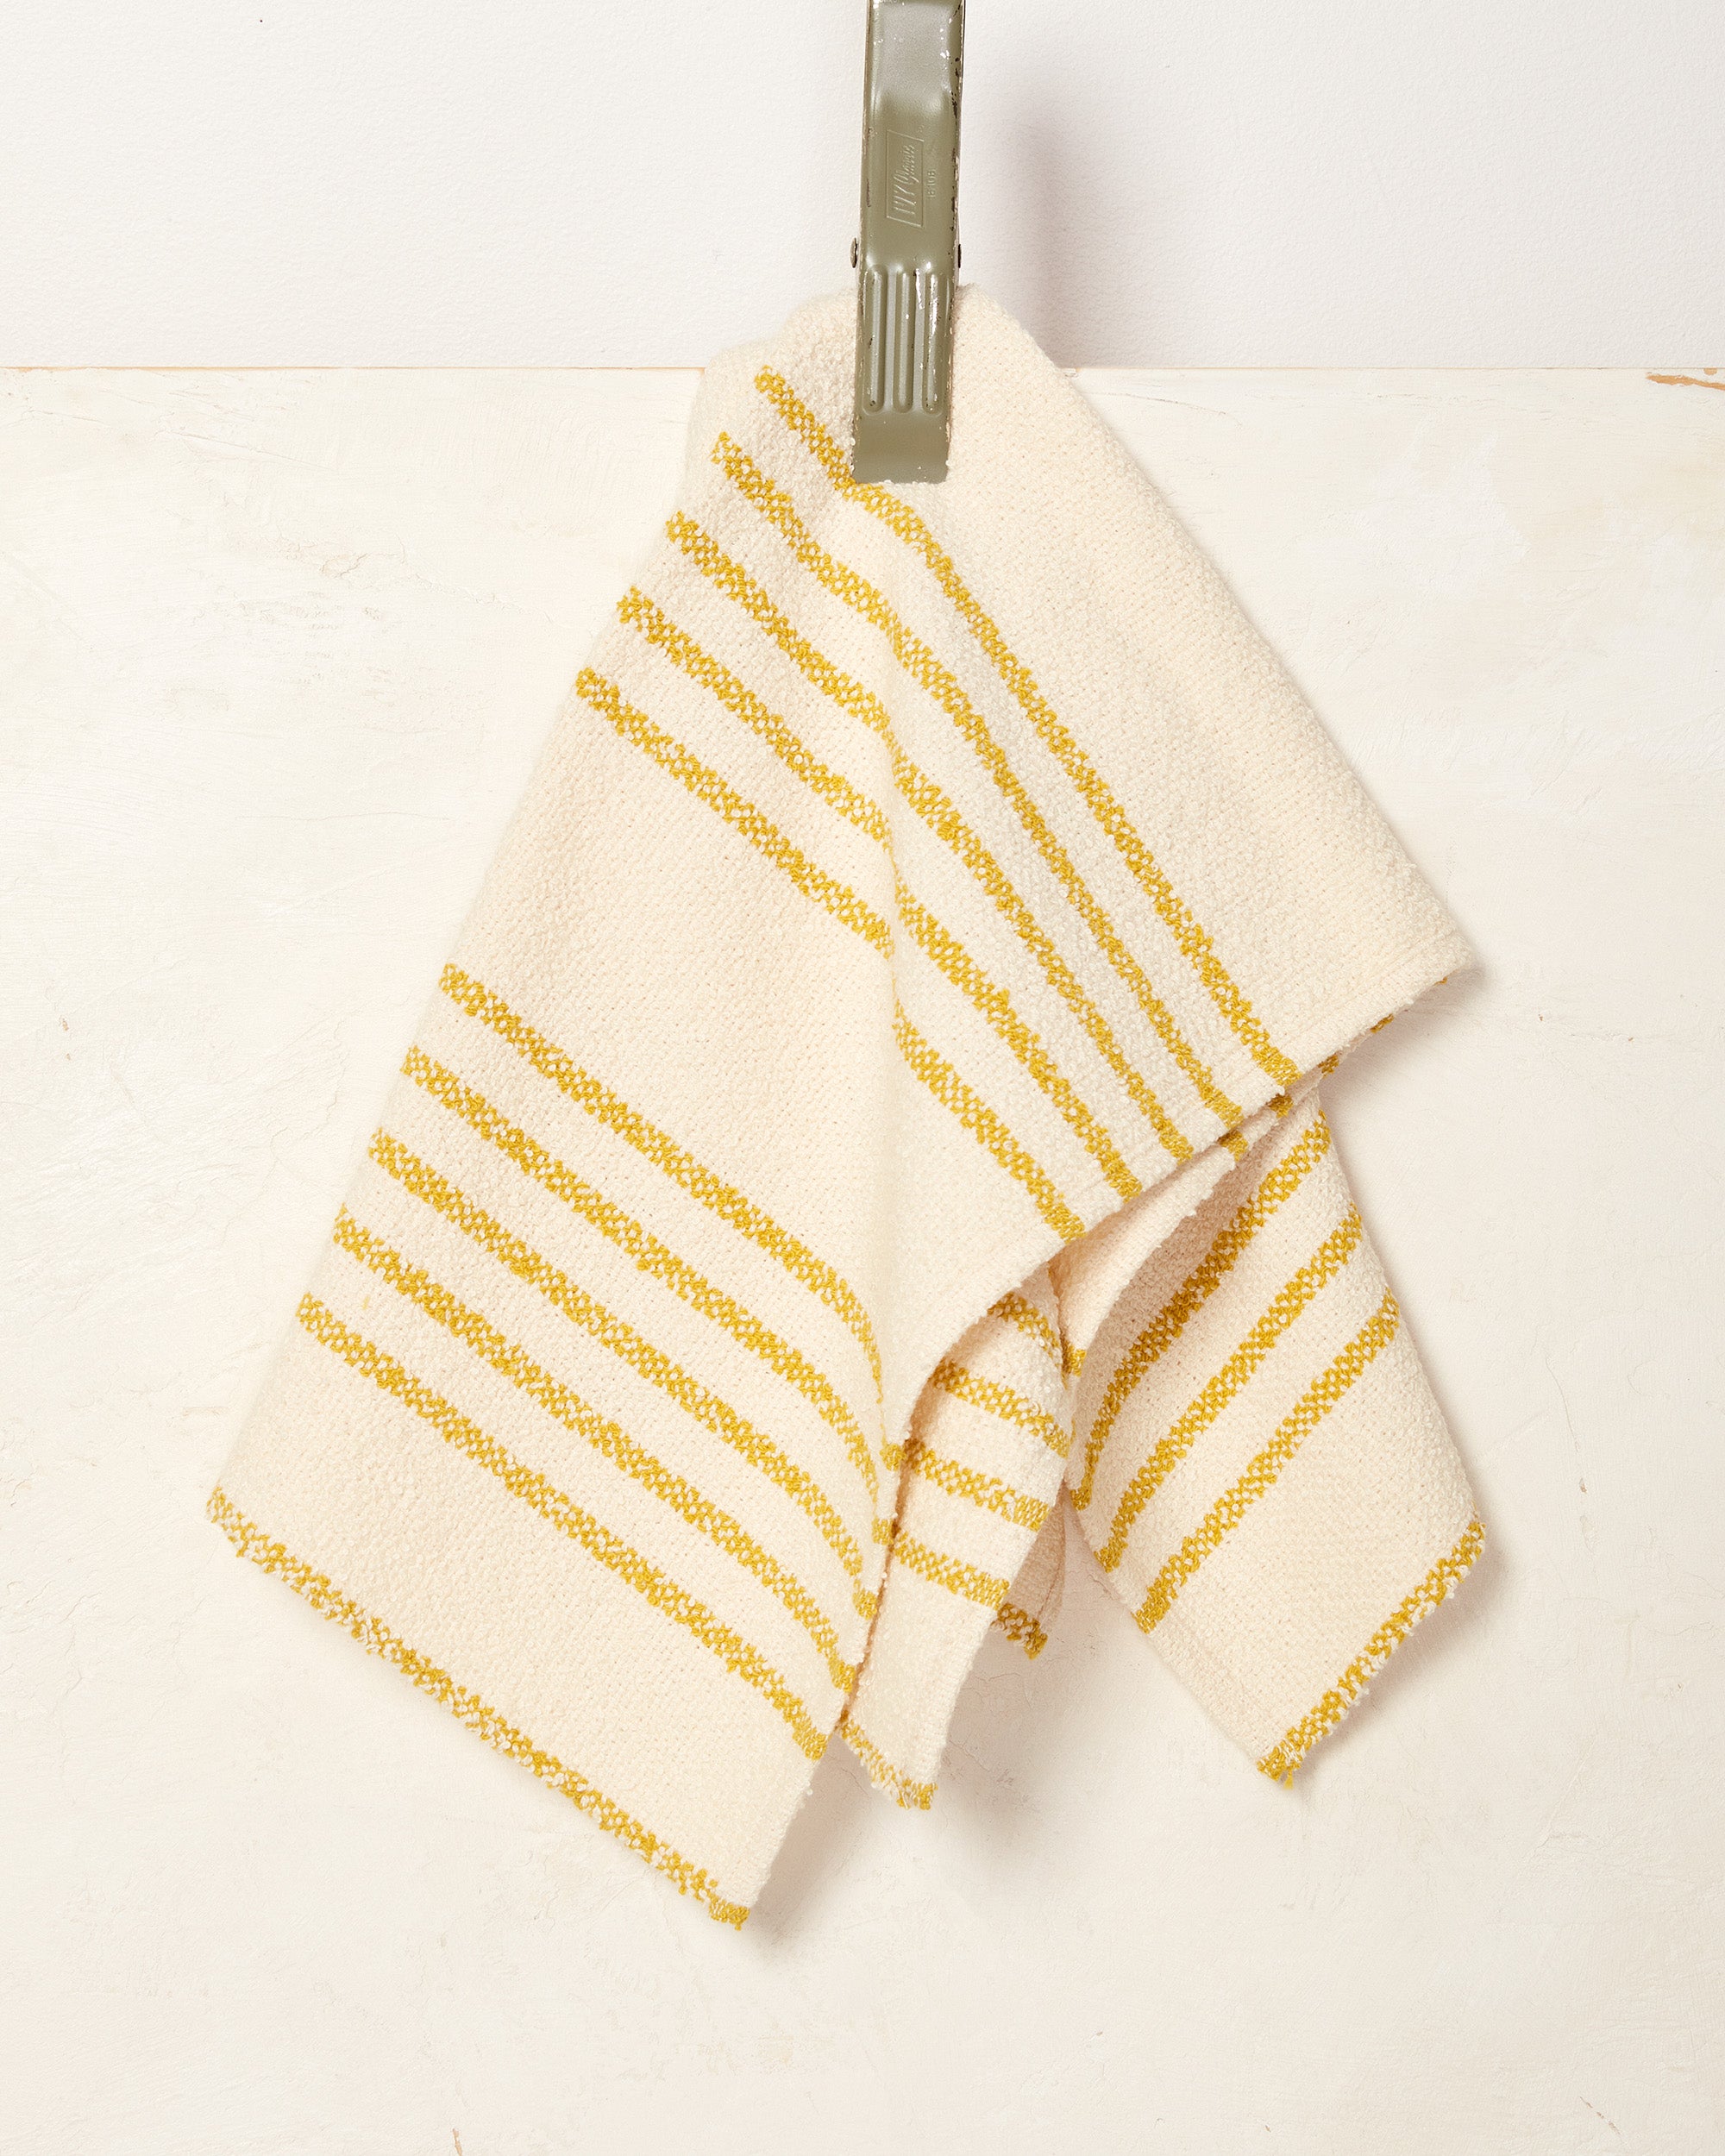 Everyday Hand Towel in Goldenrod - Ethical Home Decor